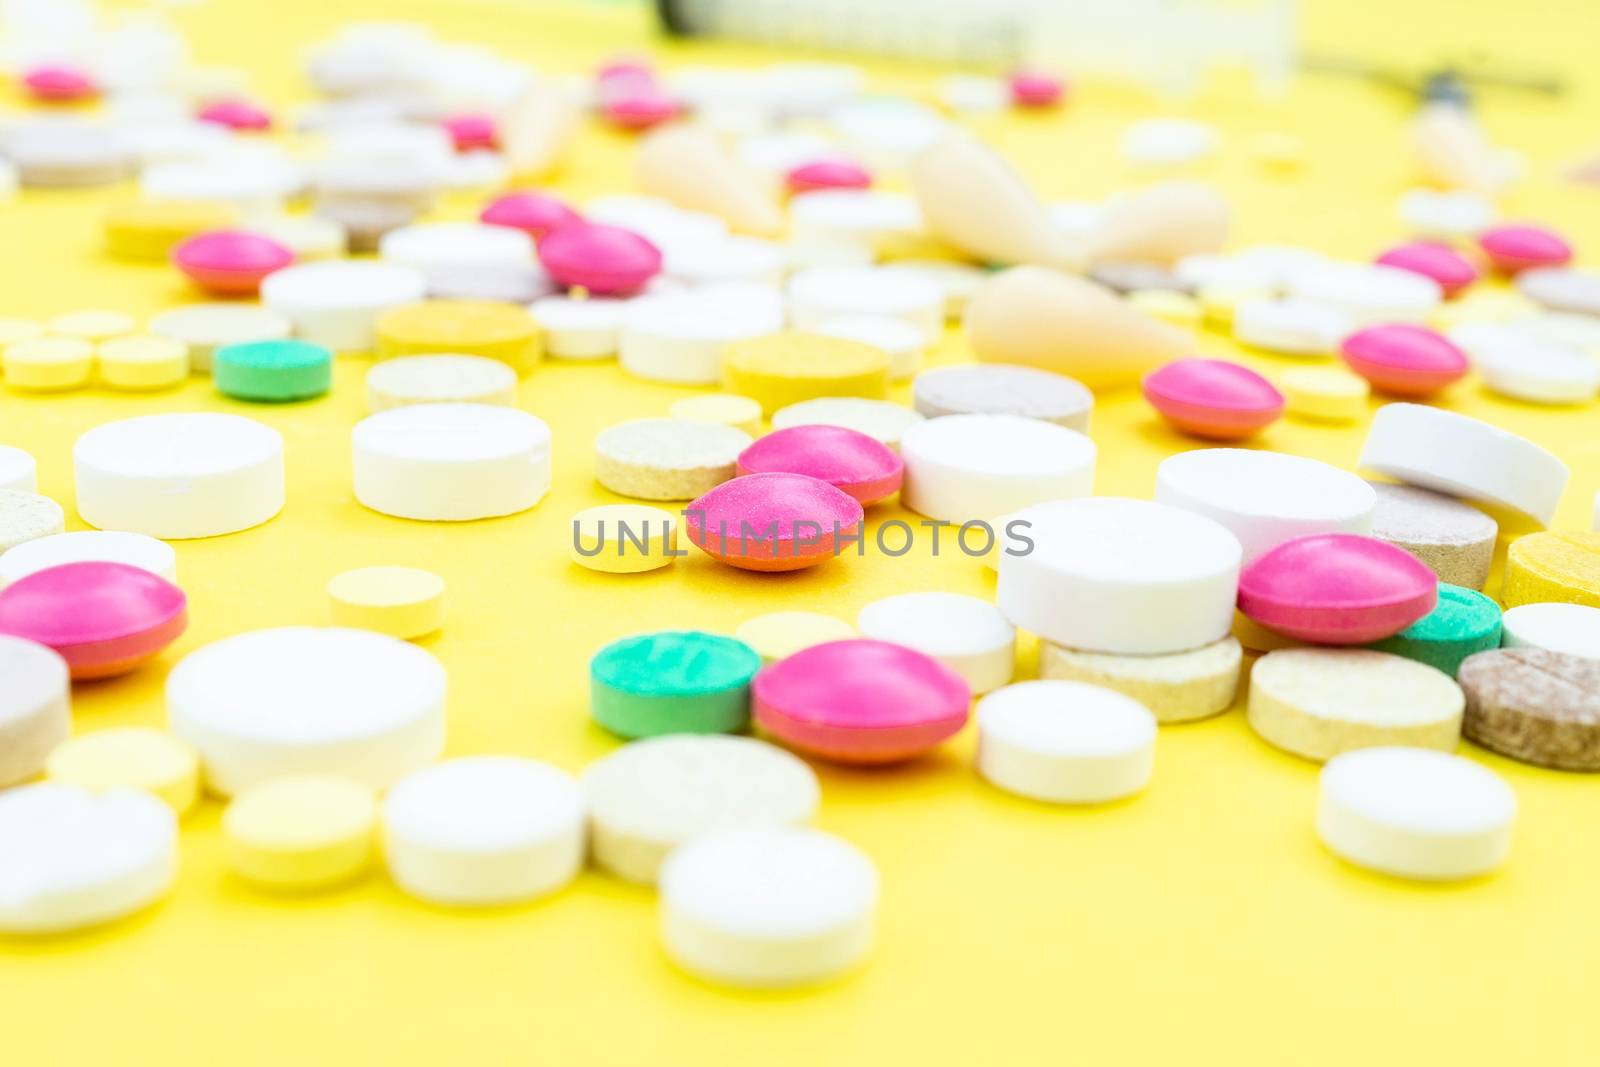 Assorted pharmaceutical medicine pills, tablets and capsules over yellow background